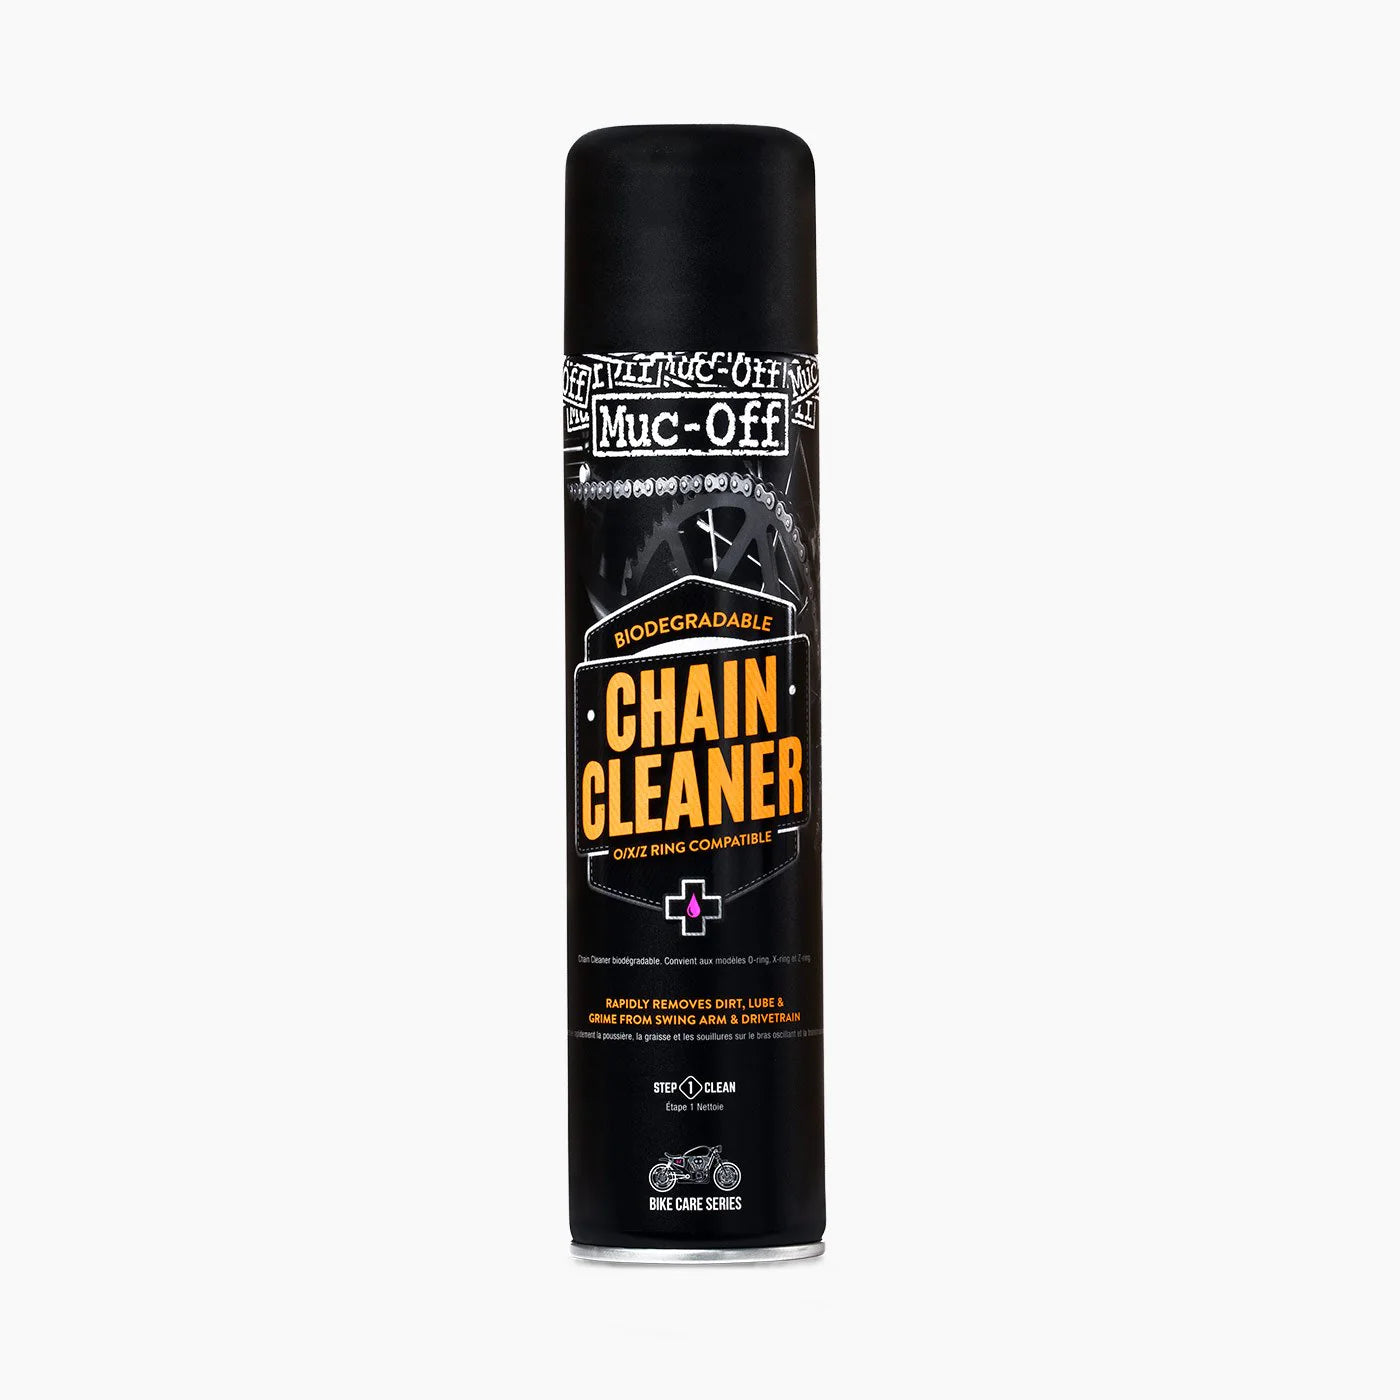 Muc-off Motorcycle Chain Cleaner 400ml can spray applicator on dirty motorcycle chain